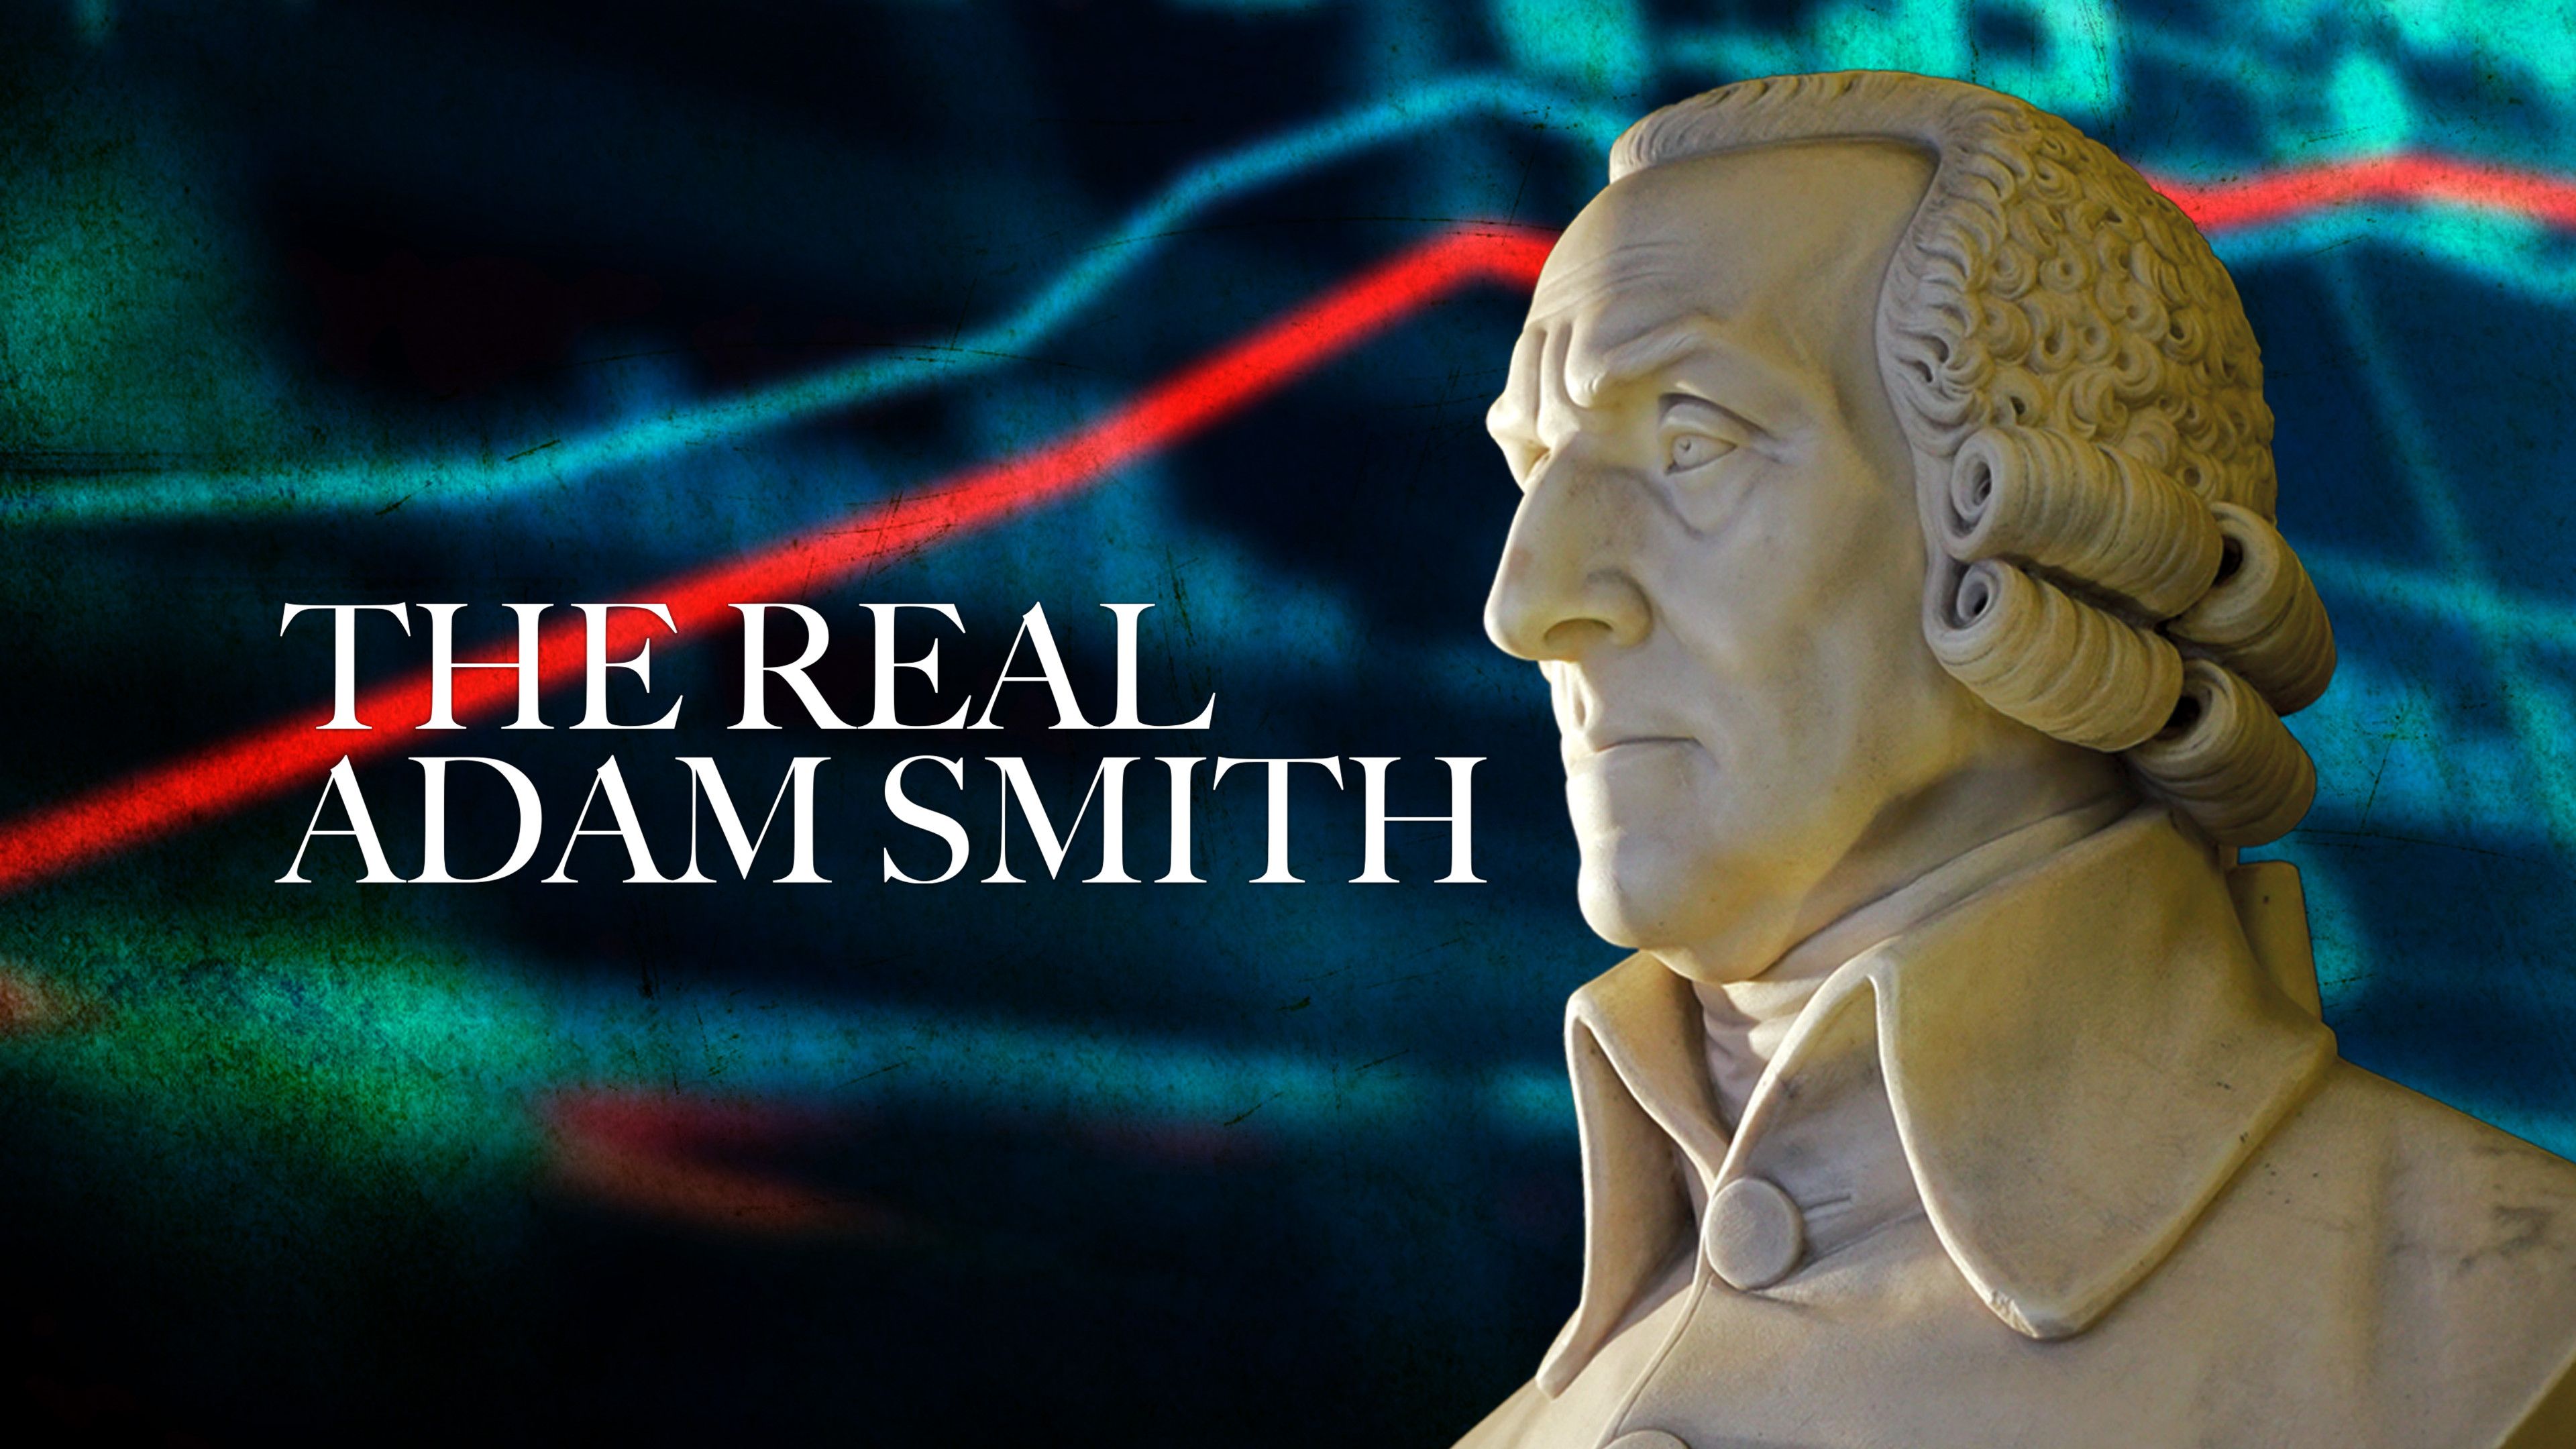 The Real Adam Smith